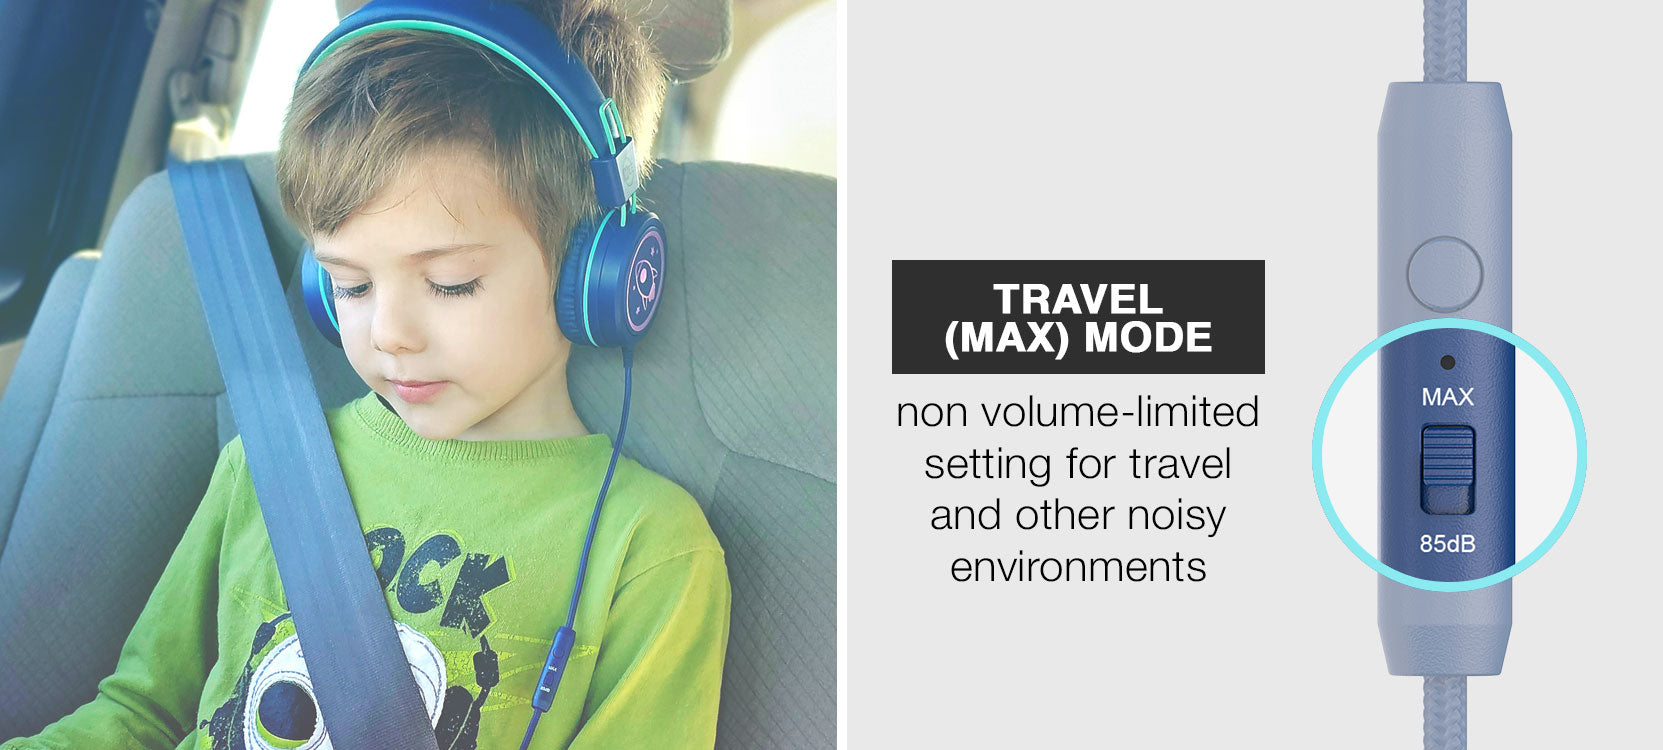 A young child wearing blue headphones sits in a car seat, paired with an image of a headphone volume control set to "travel (max) mode" for noisy environments.